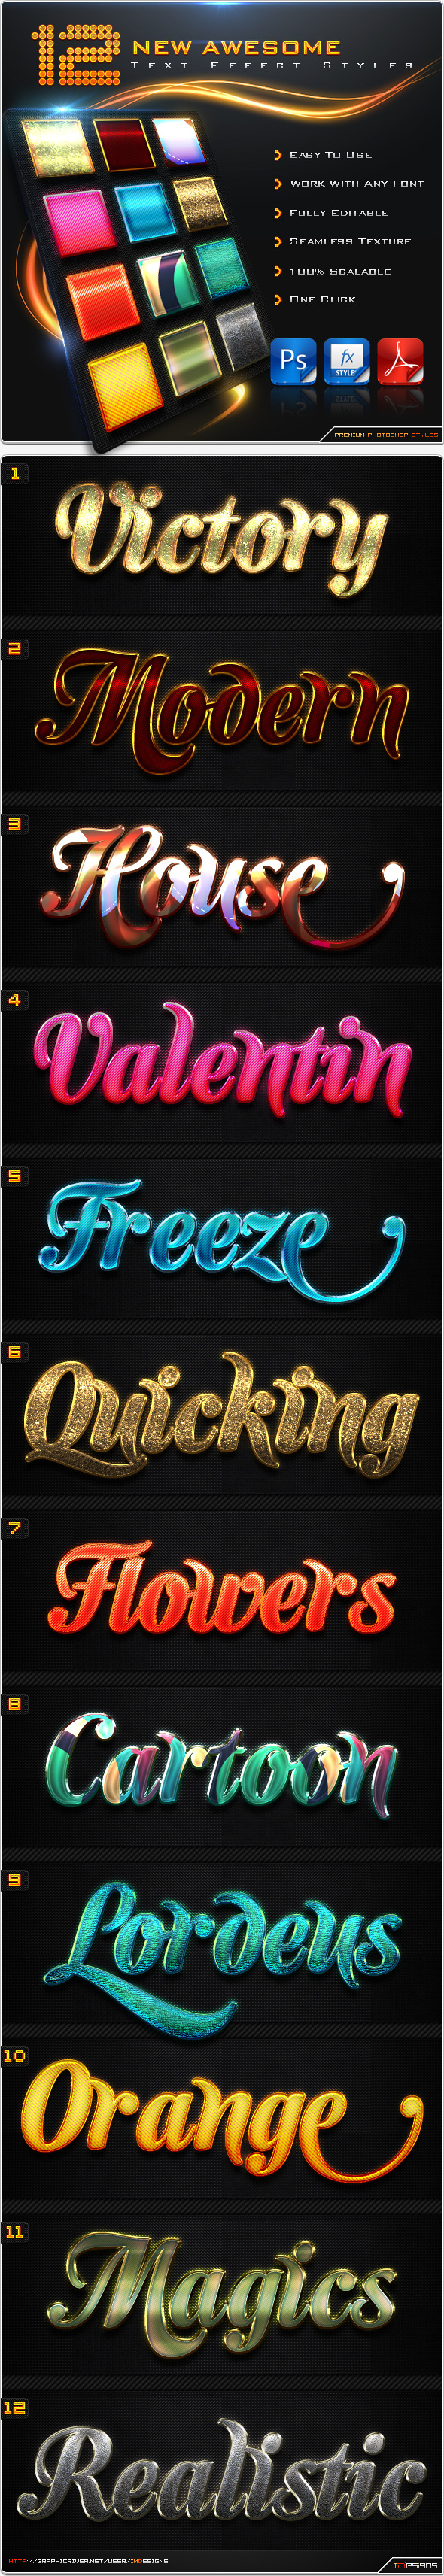 12 New Text Effect Styles